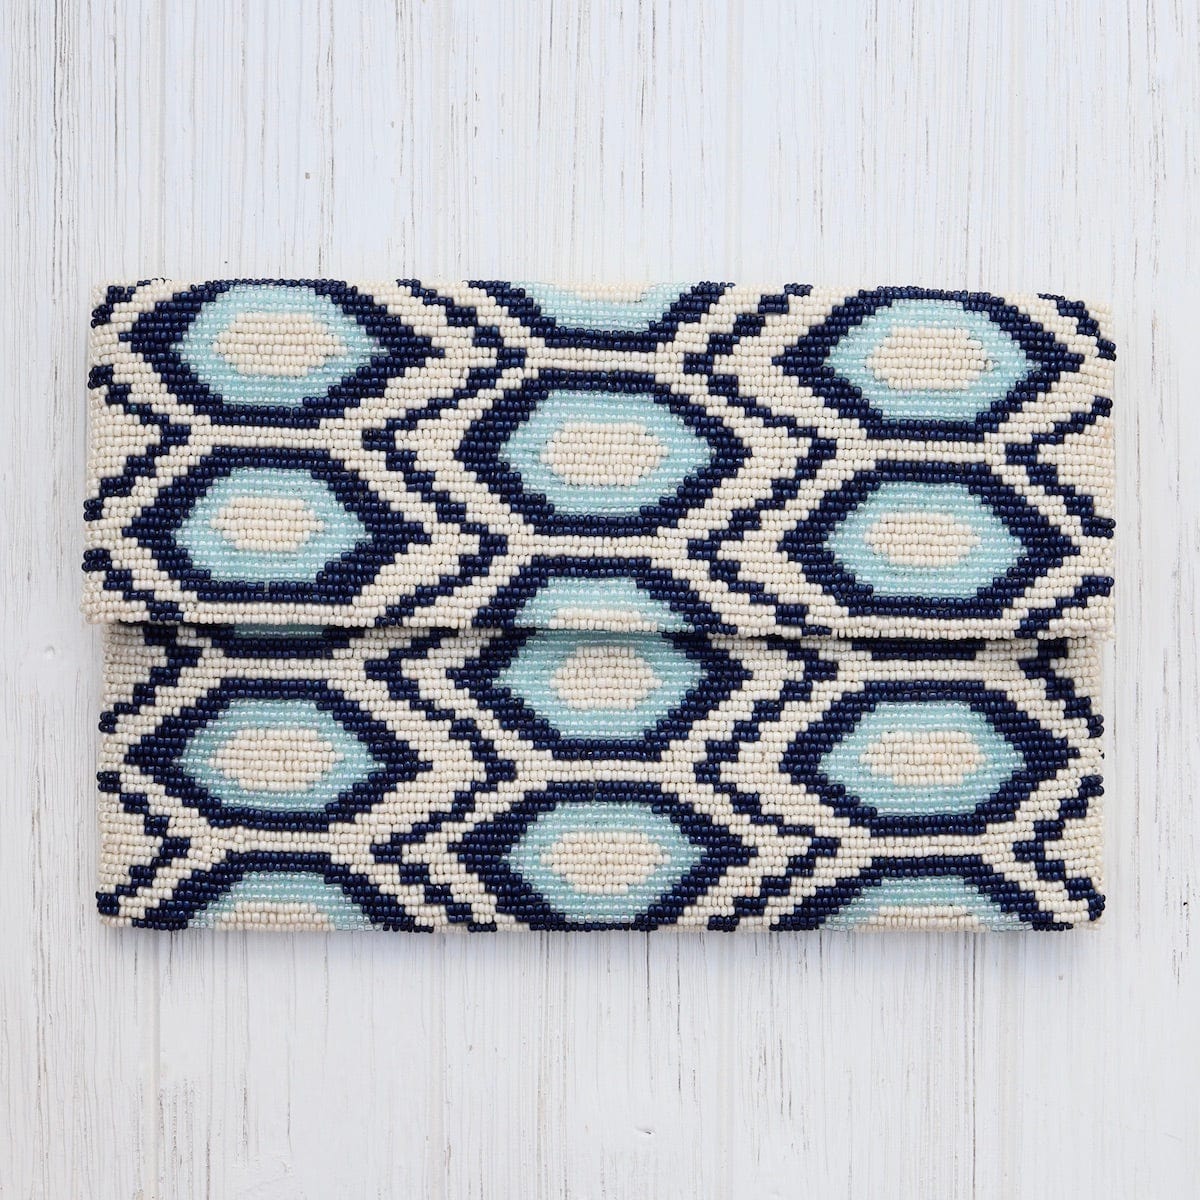 Load image into Gallery viewer, BAG Half Flap Beaded Clutch in Ivory, Light, Navy Blue
